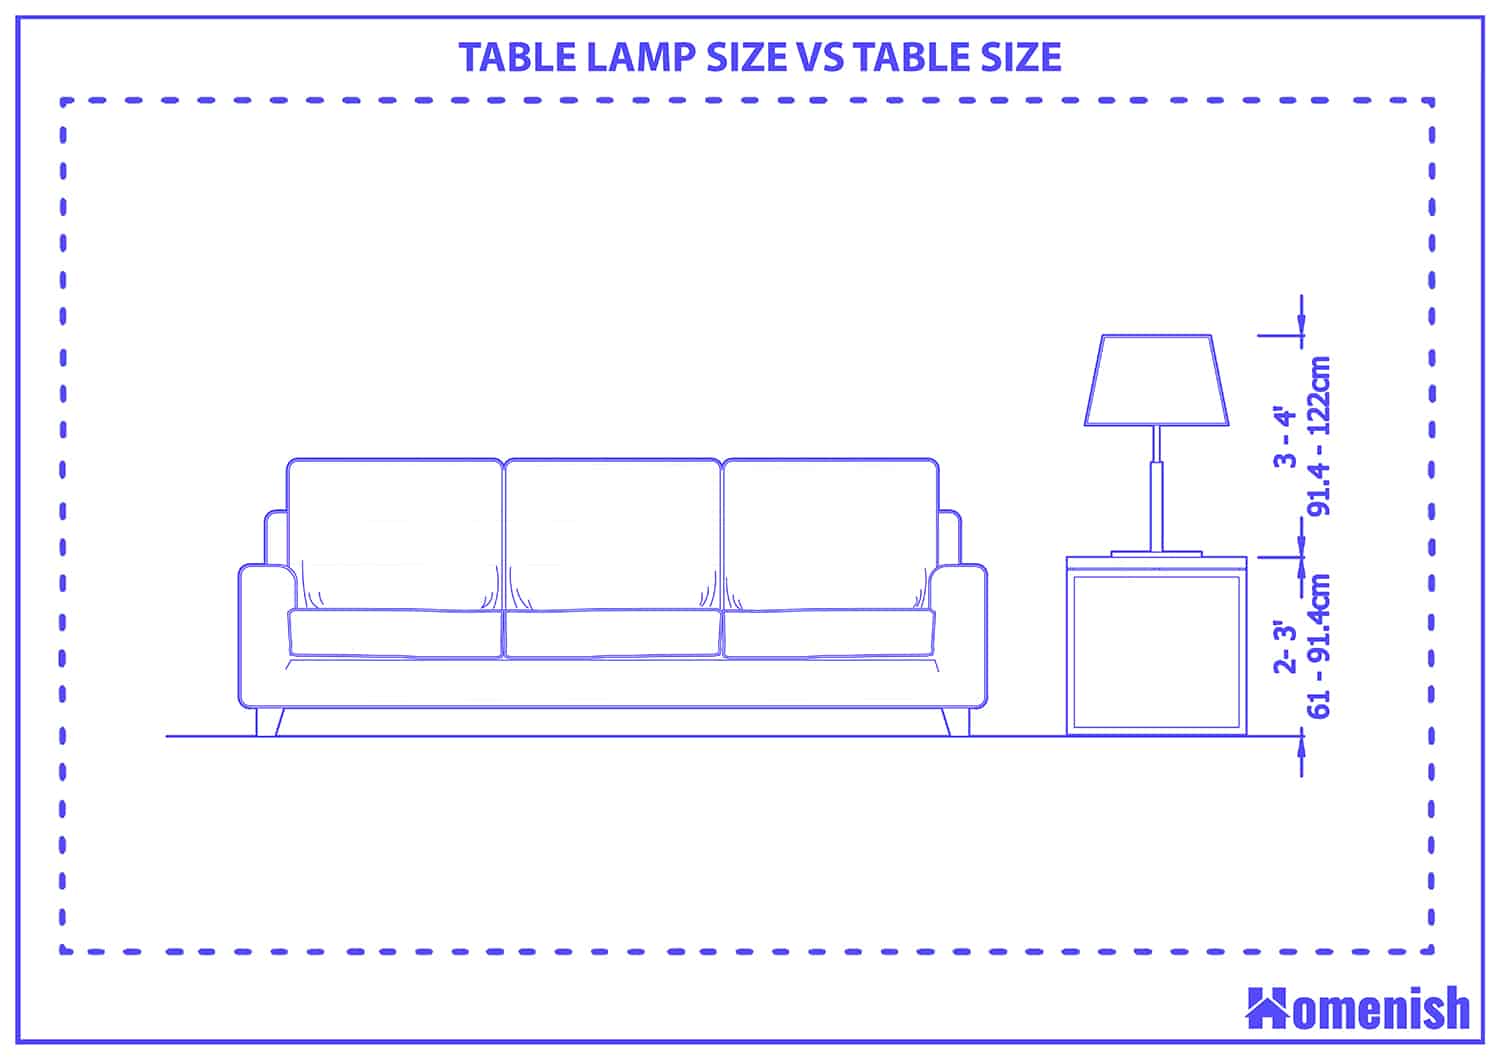 Table lamp size vs table size